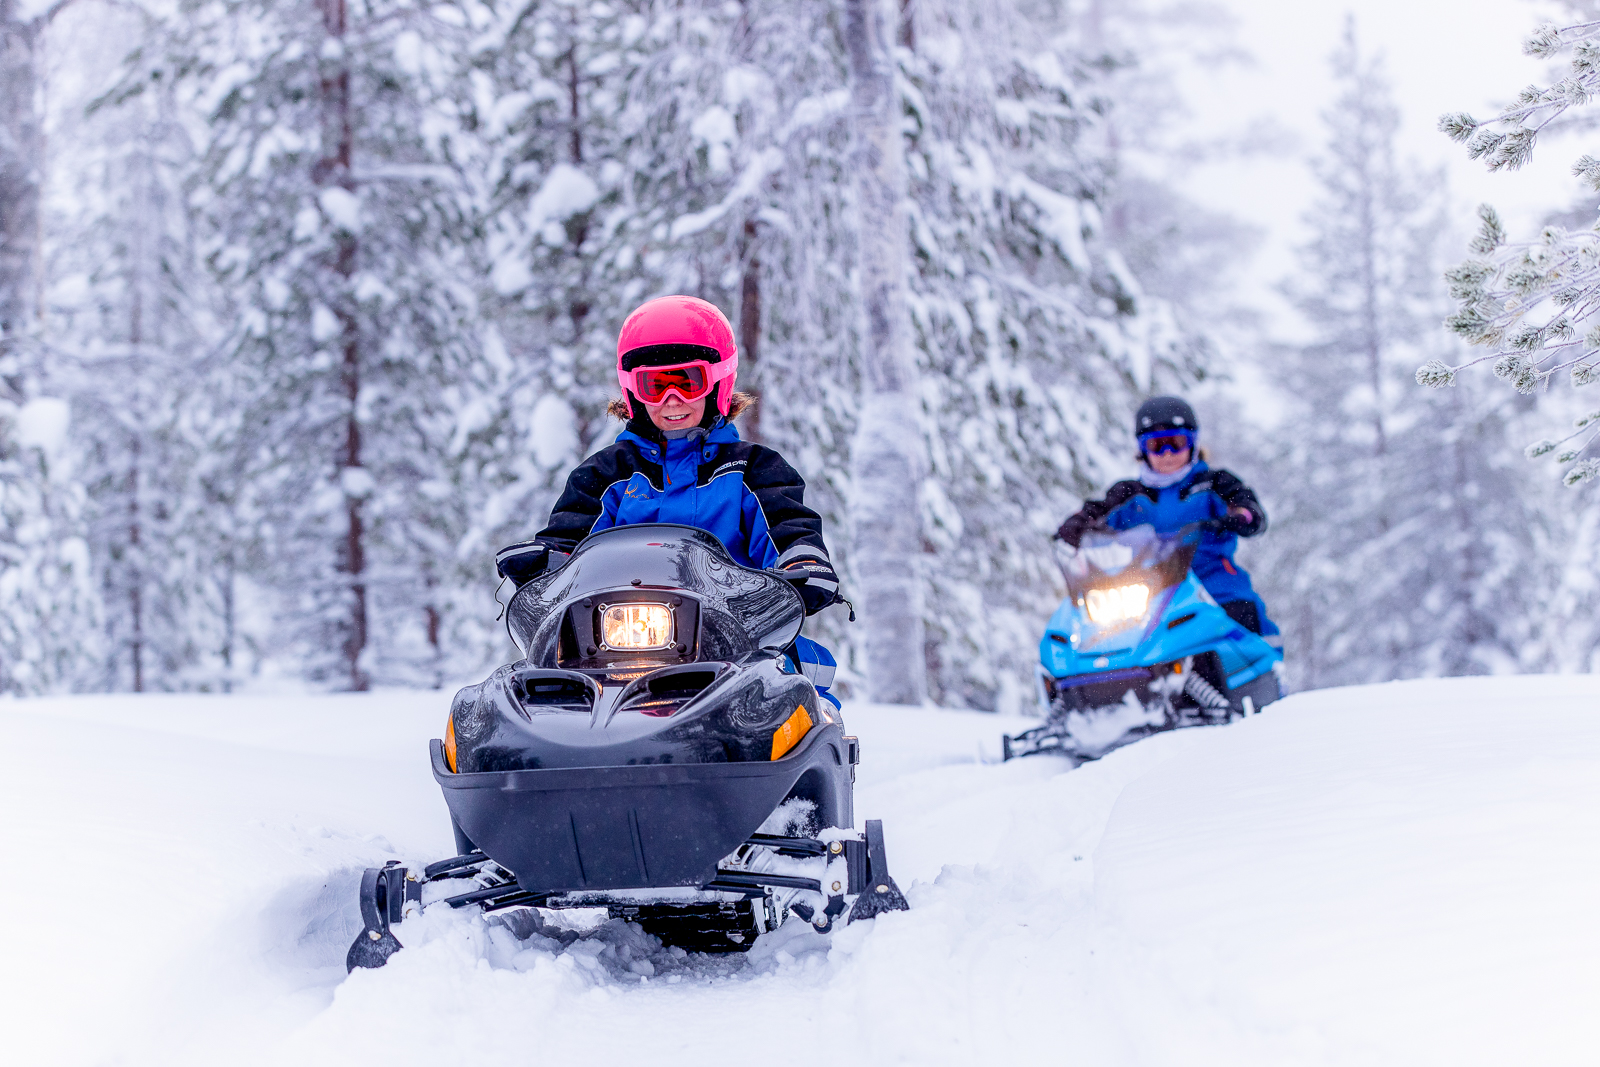 Guests of Octola in Finnish Lapland snowmobiling through the forest